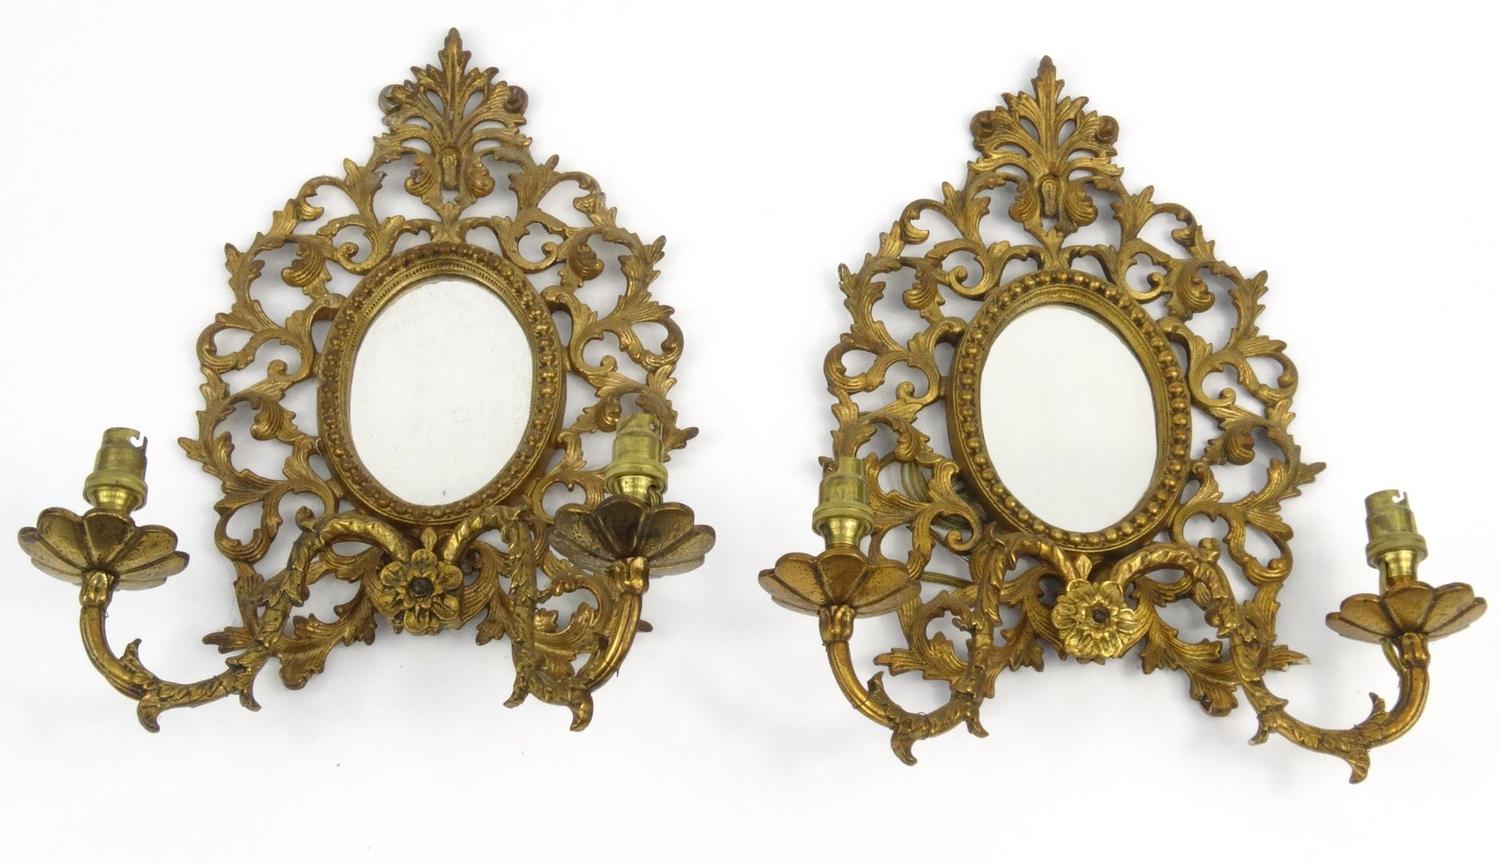 Pair of Victorian gilt brass girondelle mirrors with floral scrolls  each 35cm high :For Condition